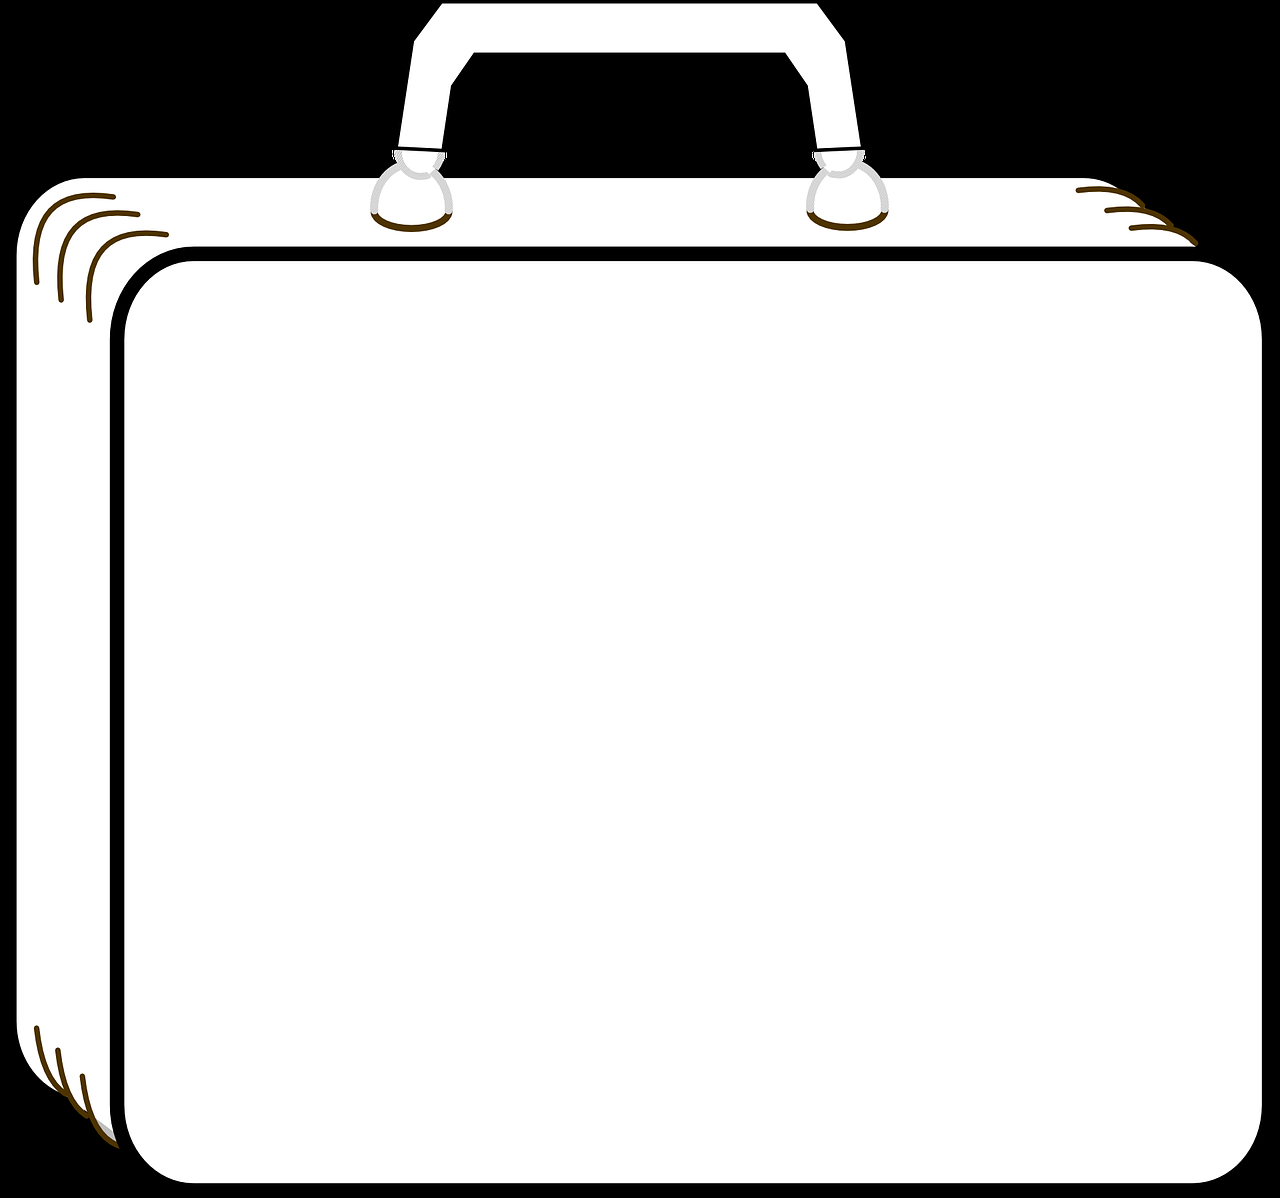 Suitcase Luggage Outline - Free vector graphic on Pixabay For Blank Suitcase Template